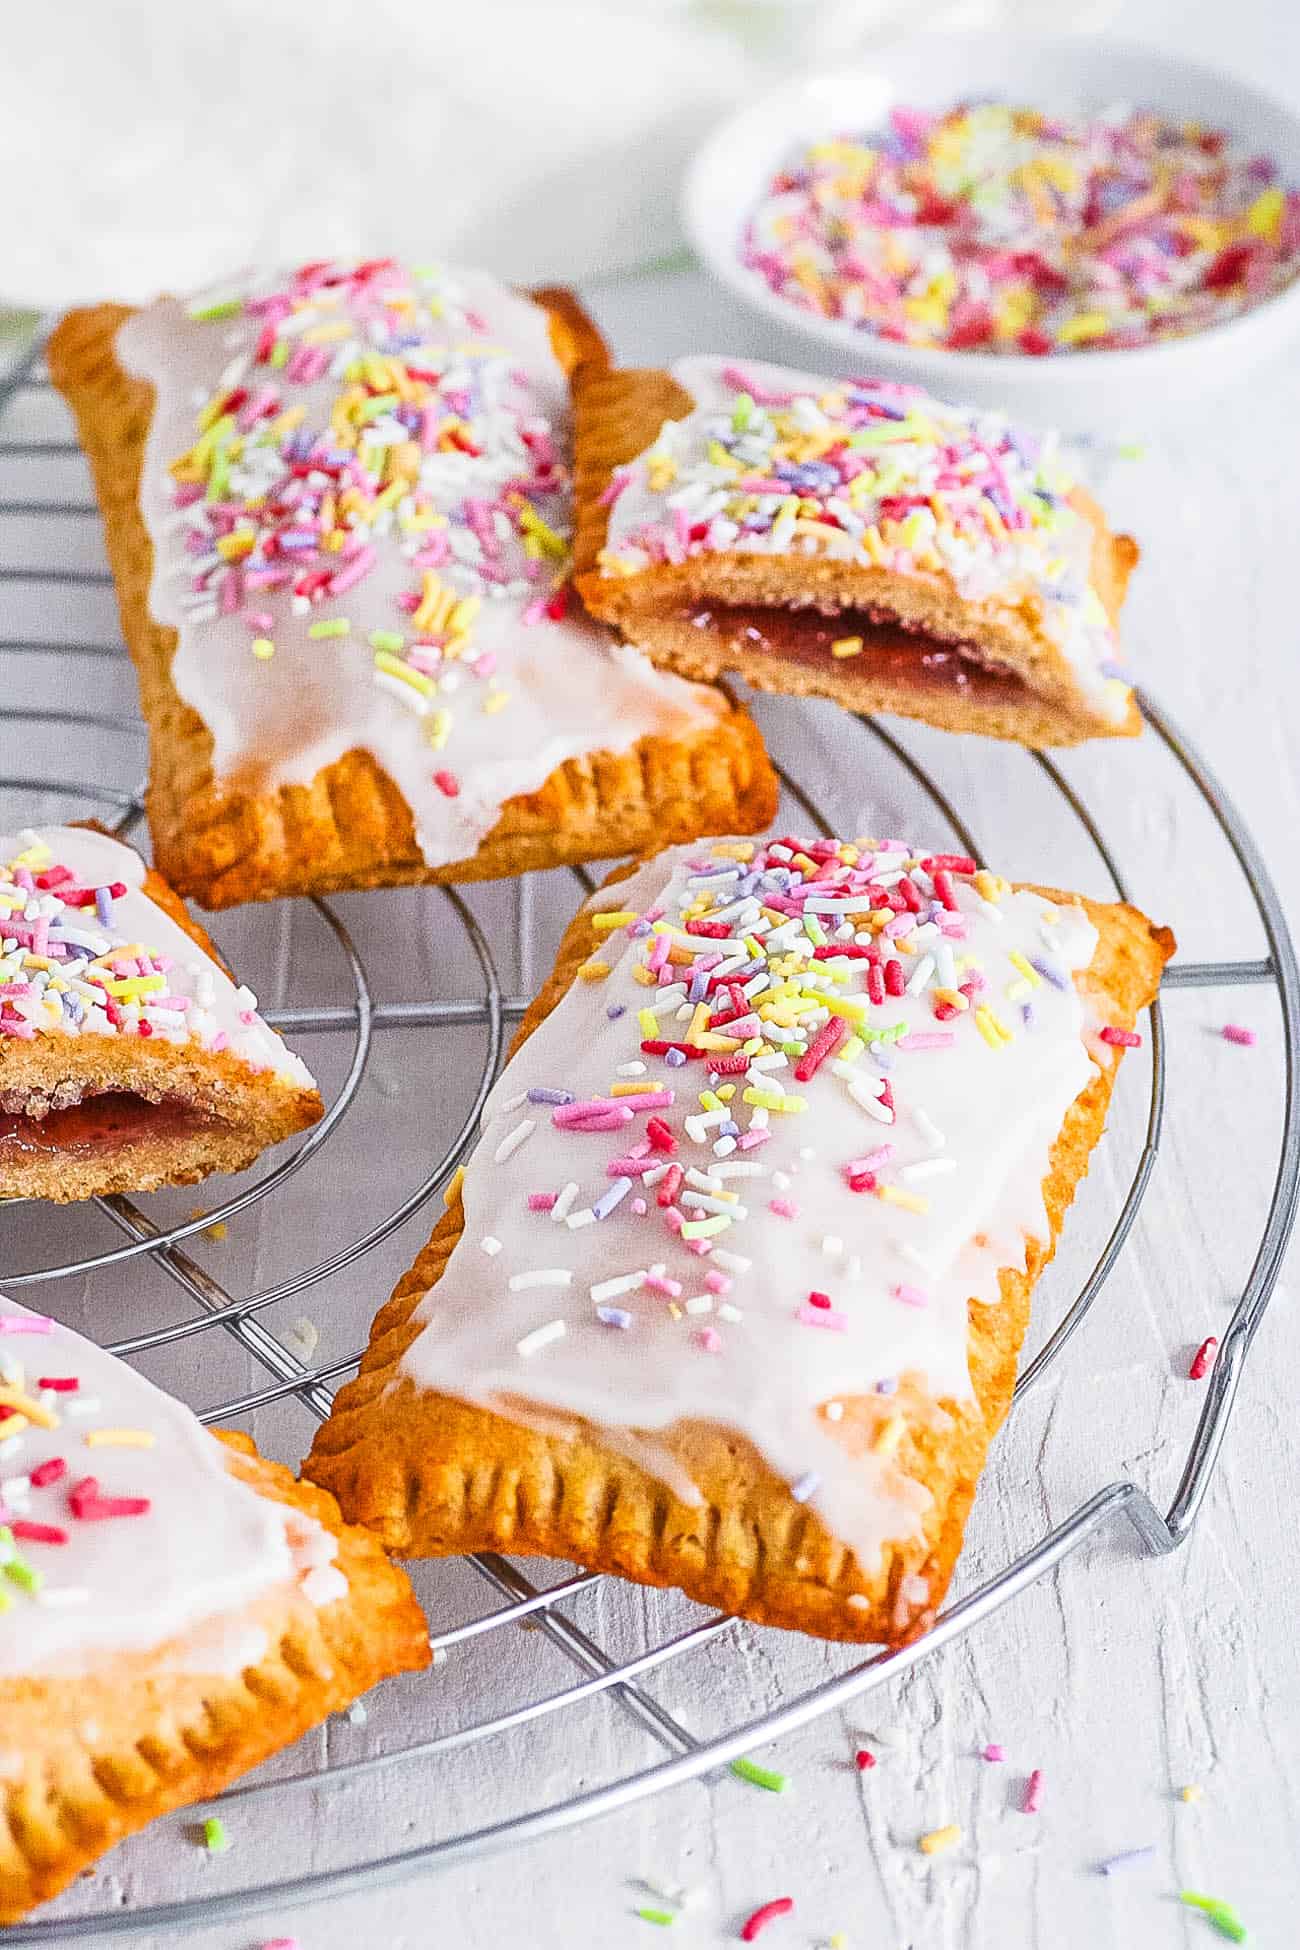 healthy homemade vegan pop tarts with strawberry filling with rainbow sprinkles and coconut yogurt icing